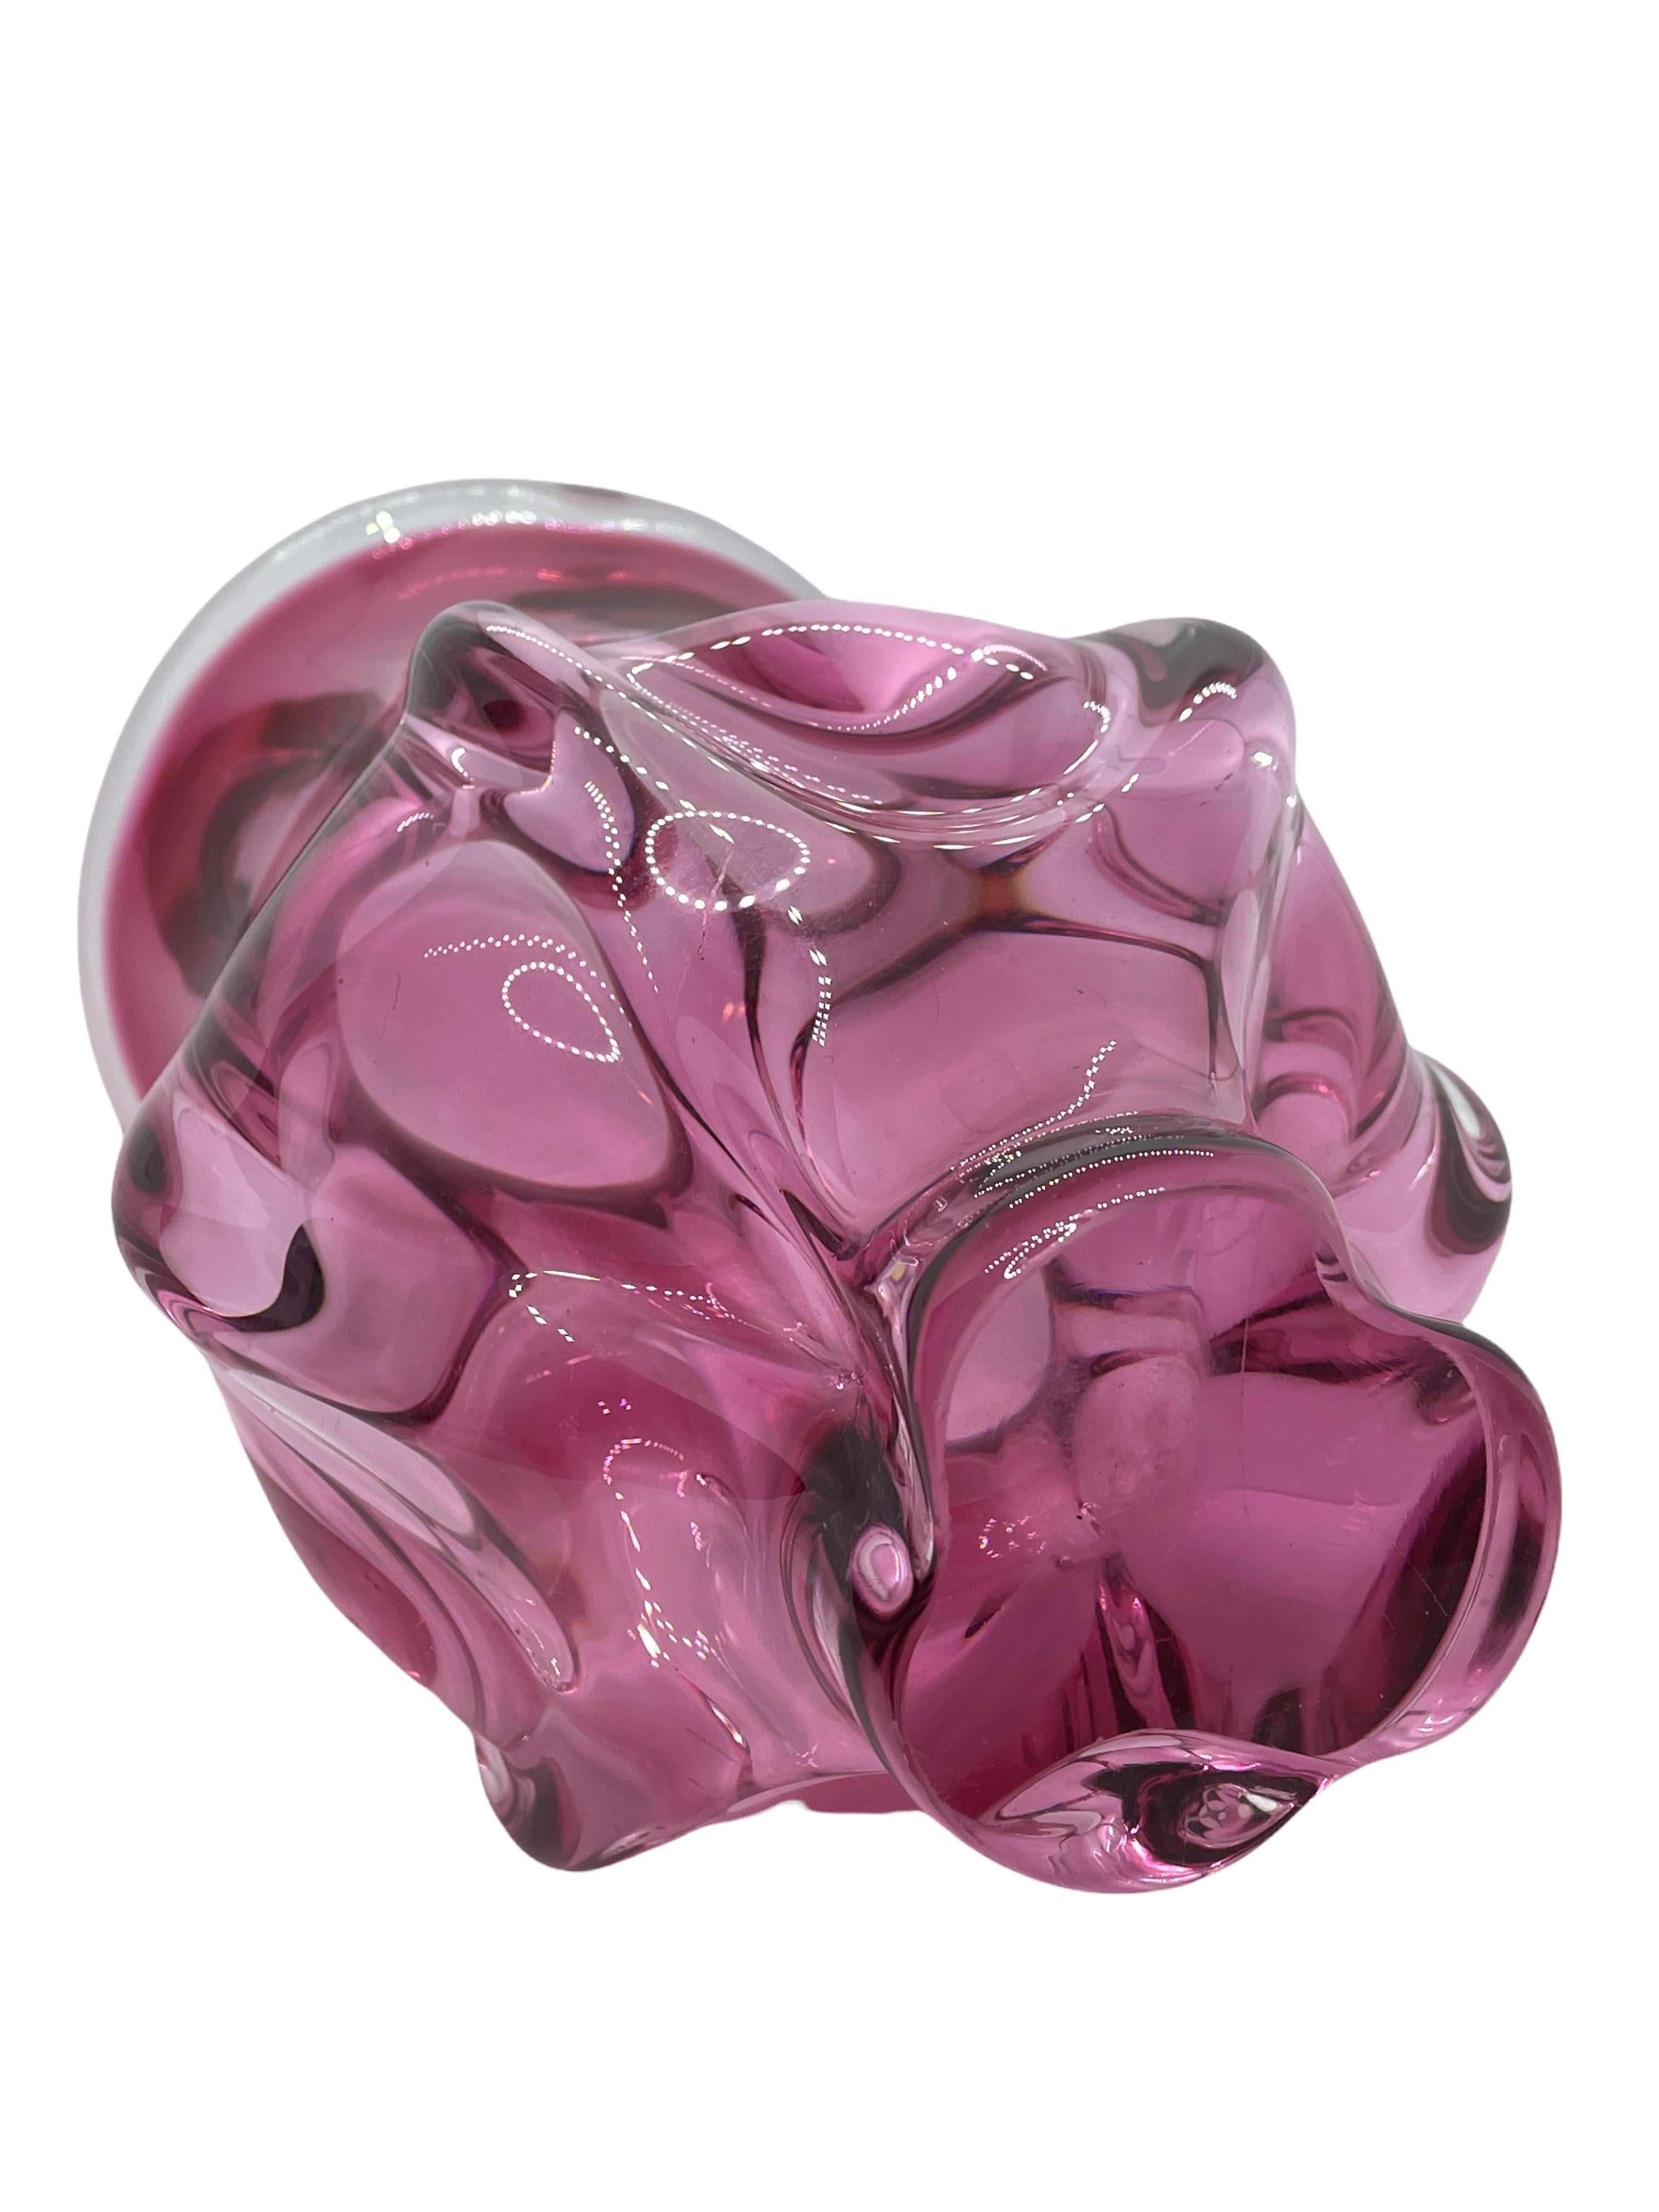 Late 20th Century Pink and Clear Sommerso Art Glass Vase Object Sculpture Murano, Italy, 1970s